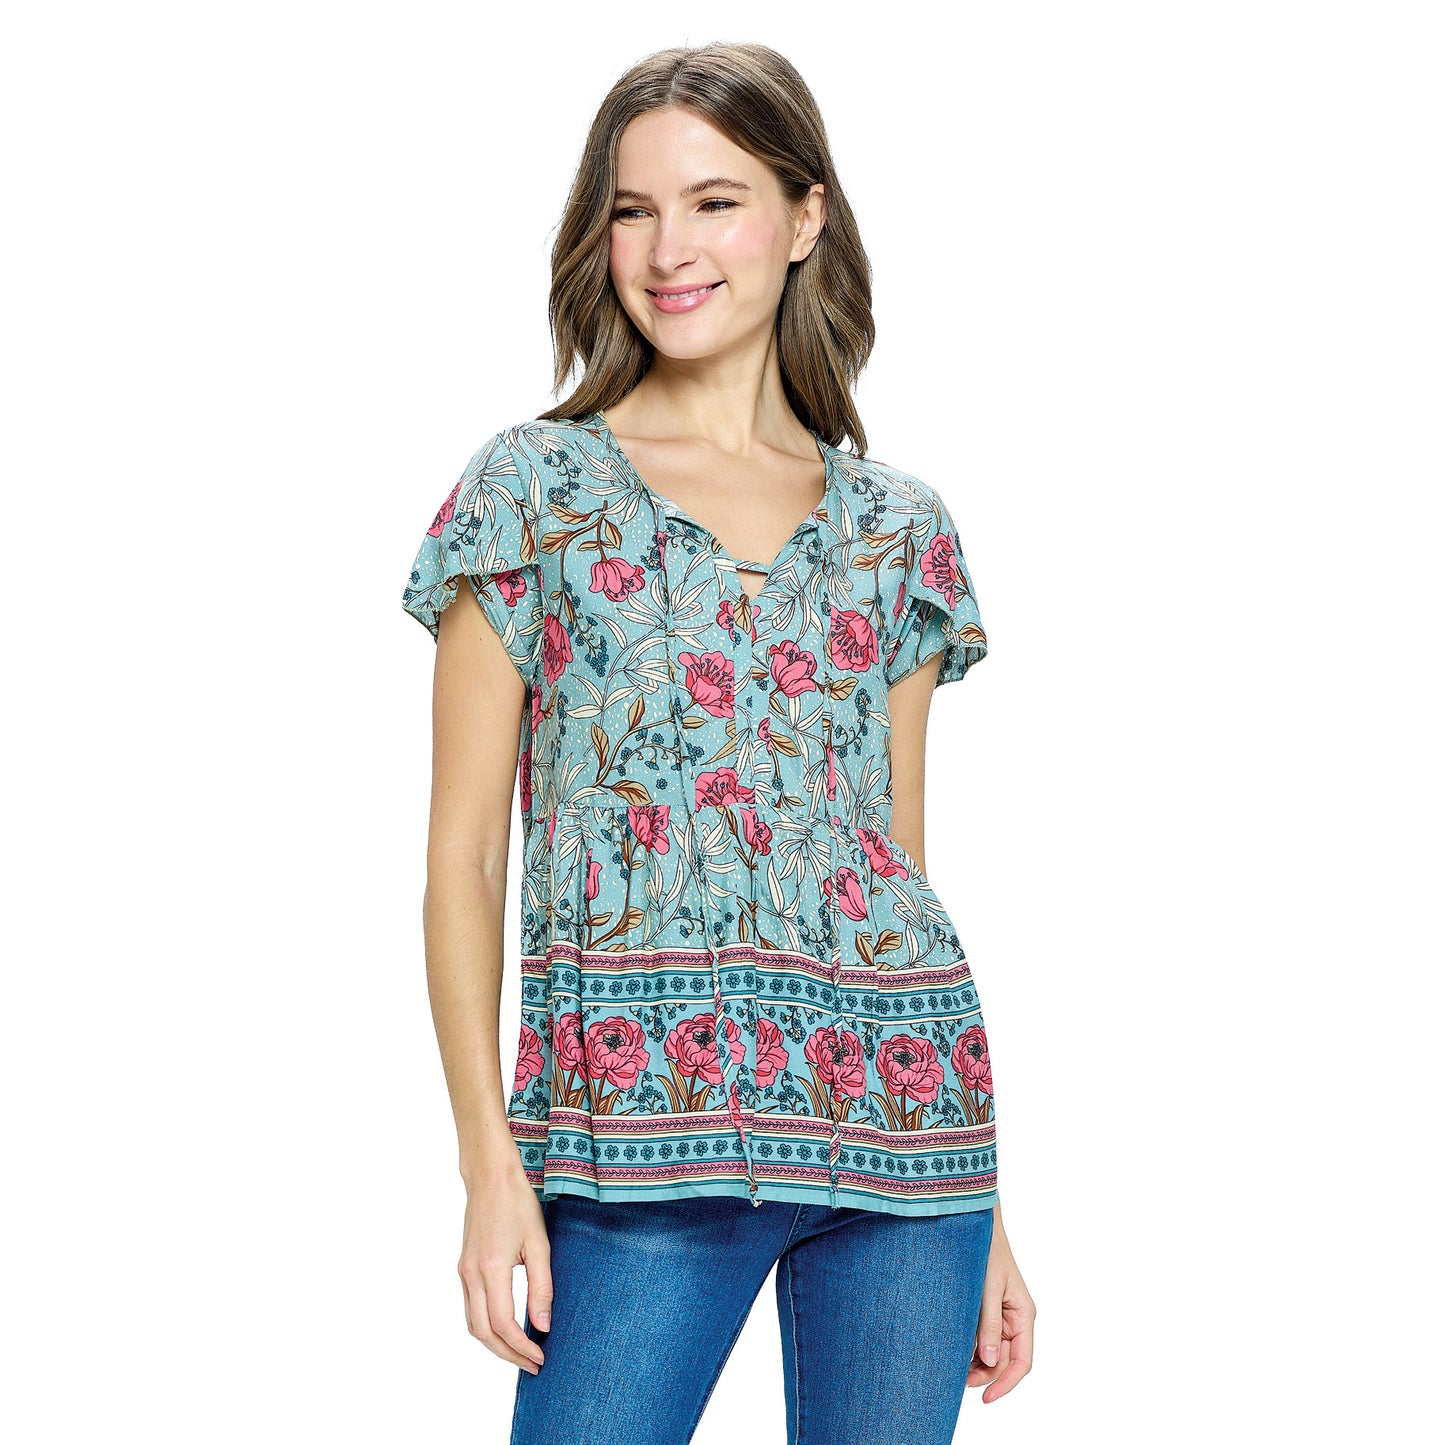 Blouse Floral Ruffled